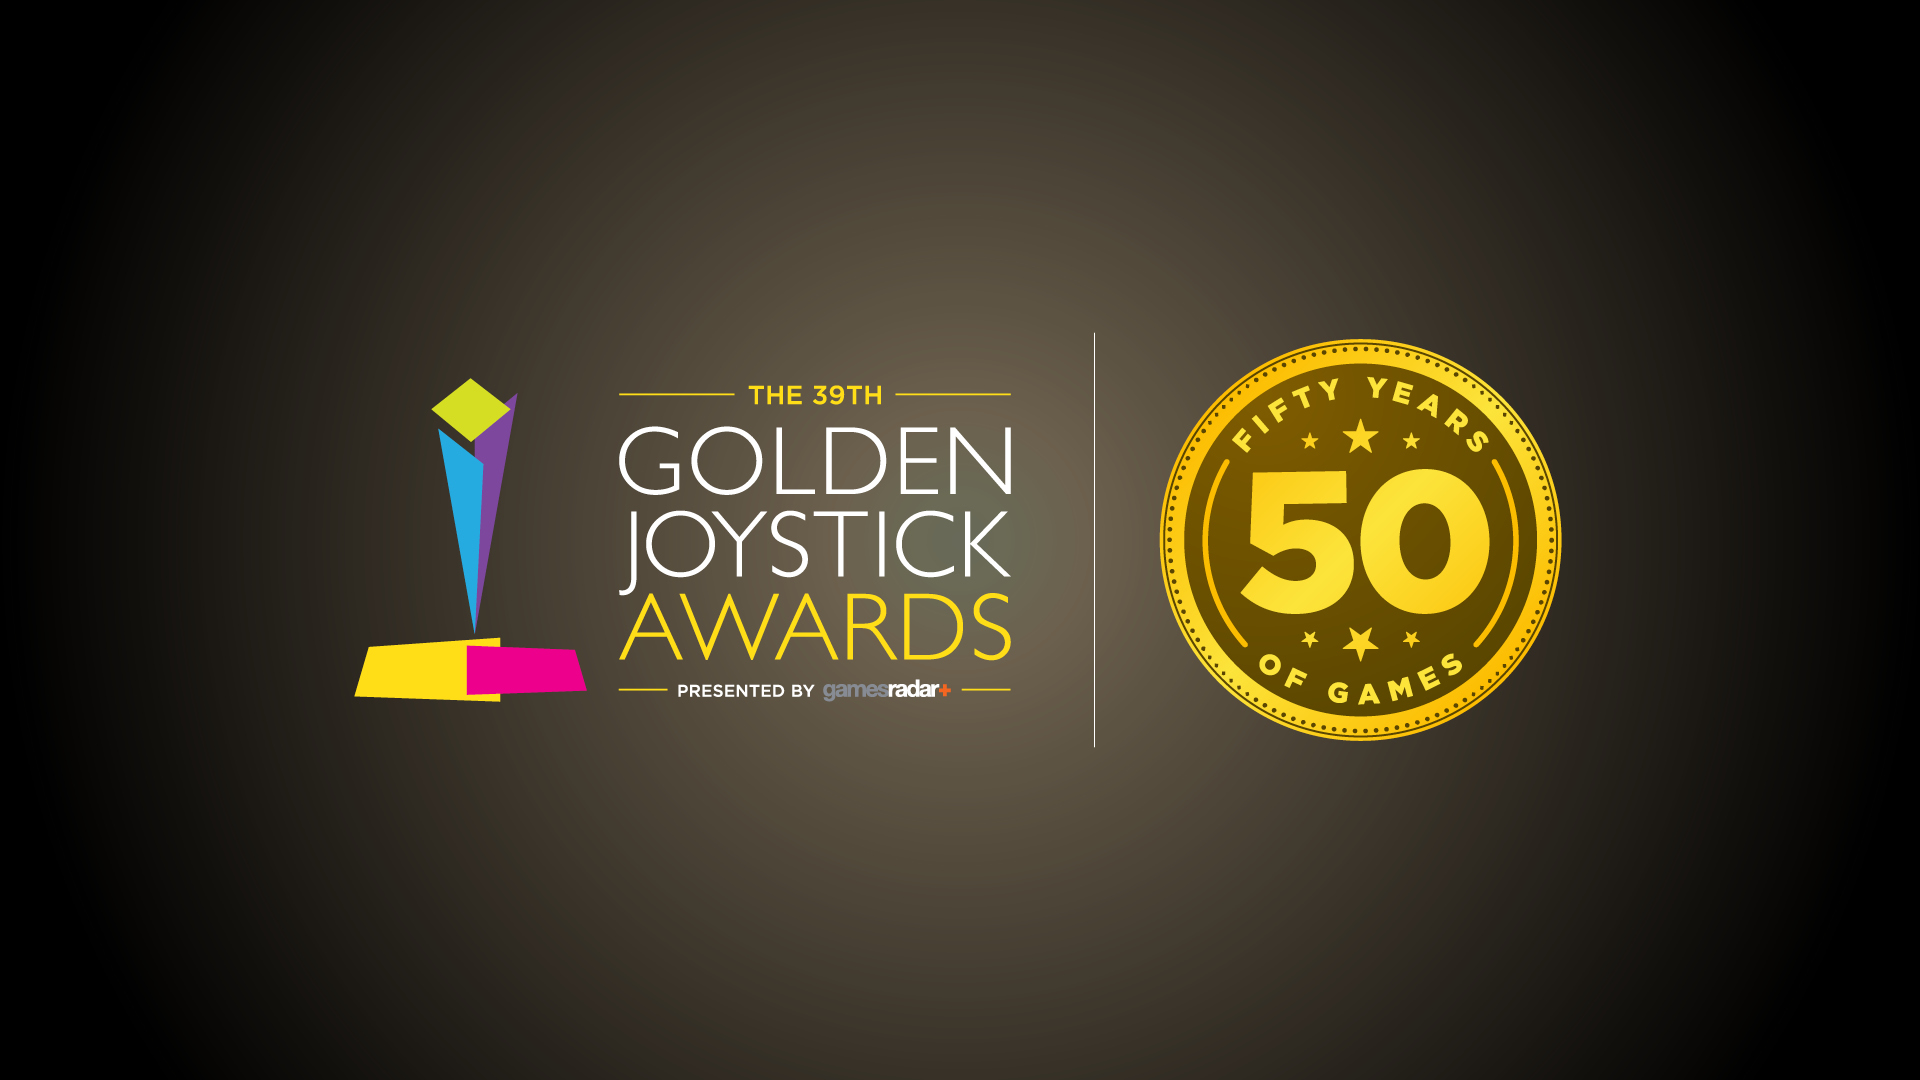 Golden Joystick Awards 2021: see the full list of nominees and how to vote today